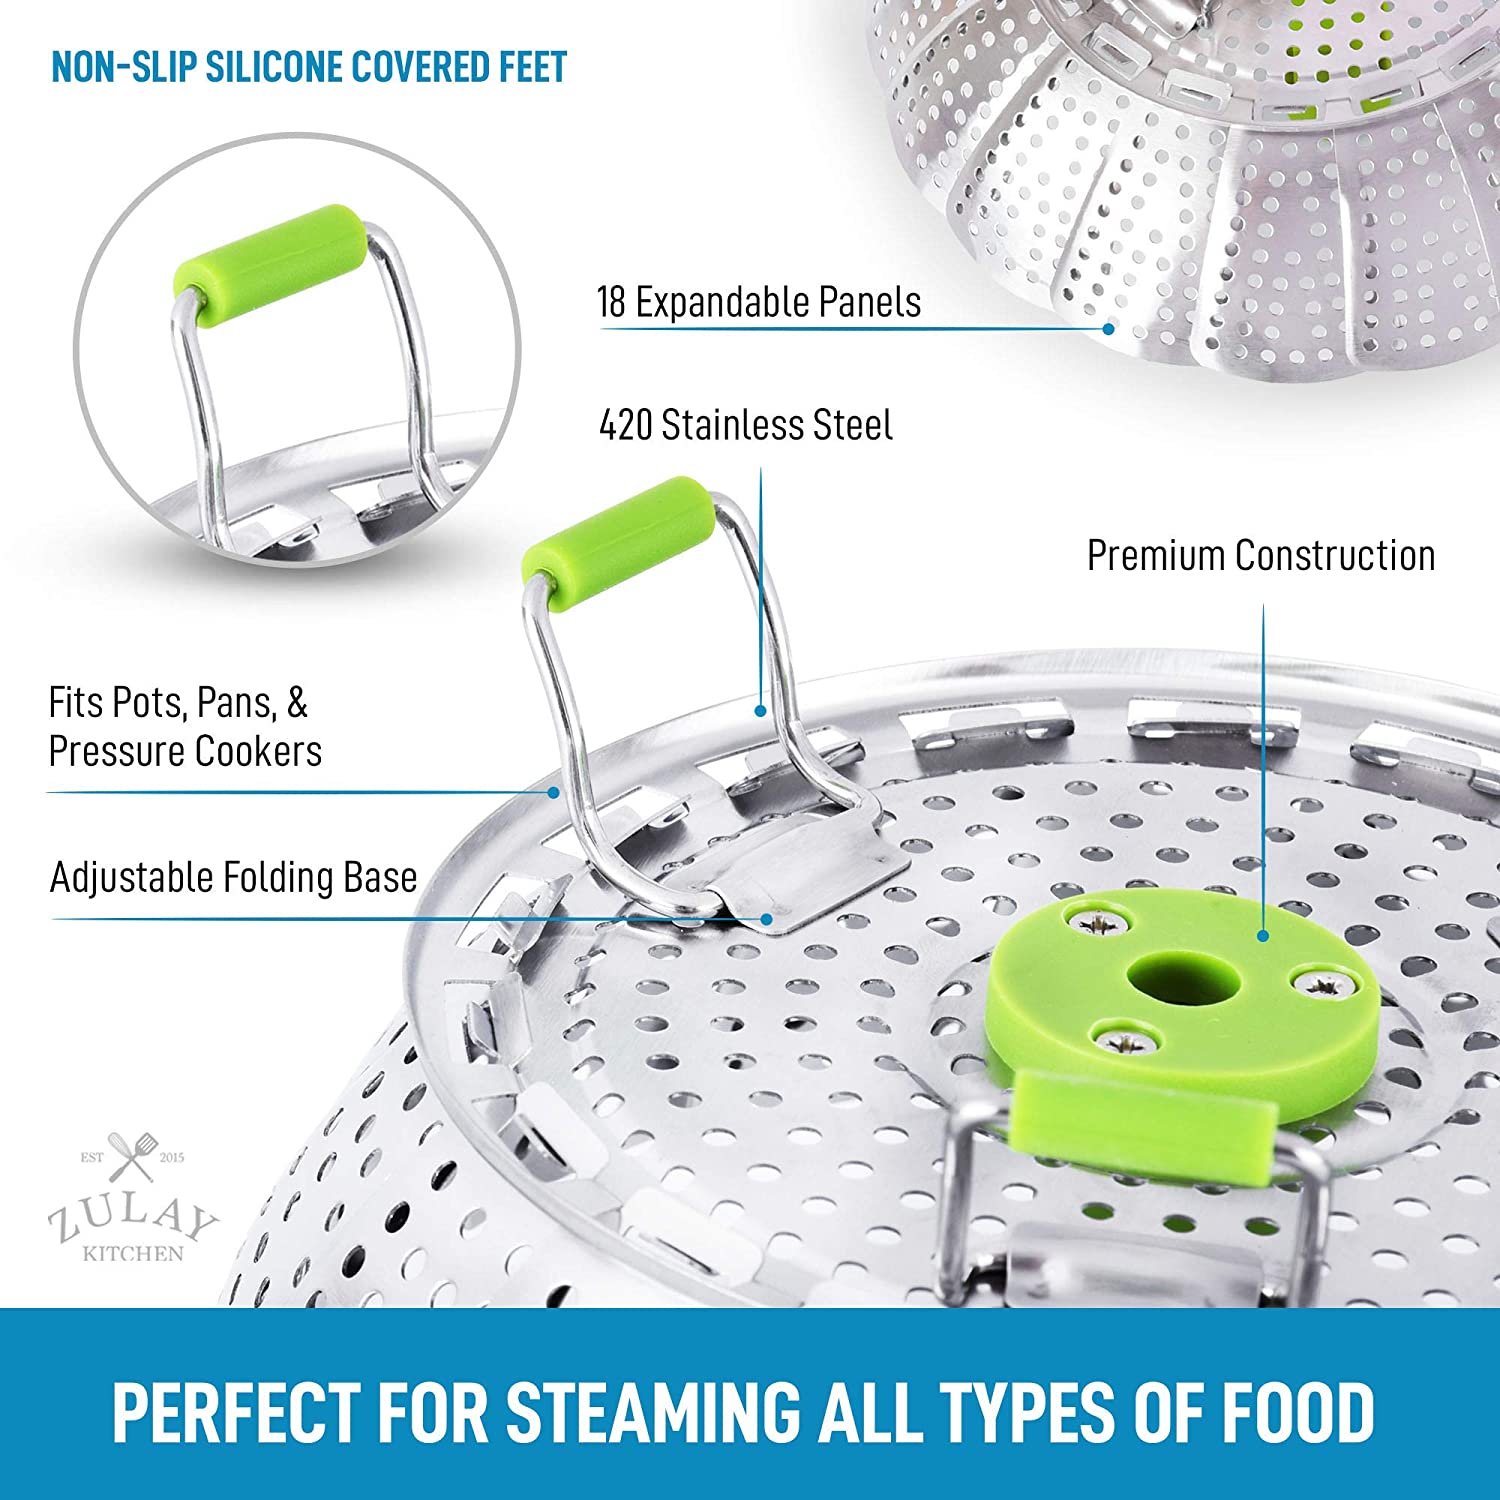 Silicone Vegetable/Food Steamer Basket – Insert for Pots, Pans, Crock Pots  & More… By Sunsella